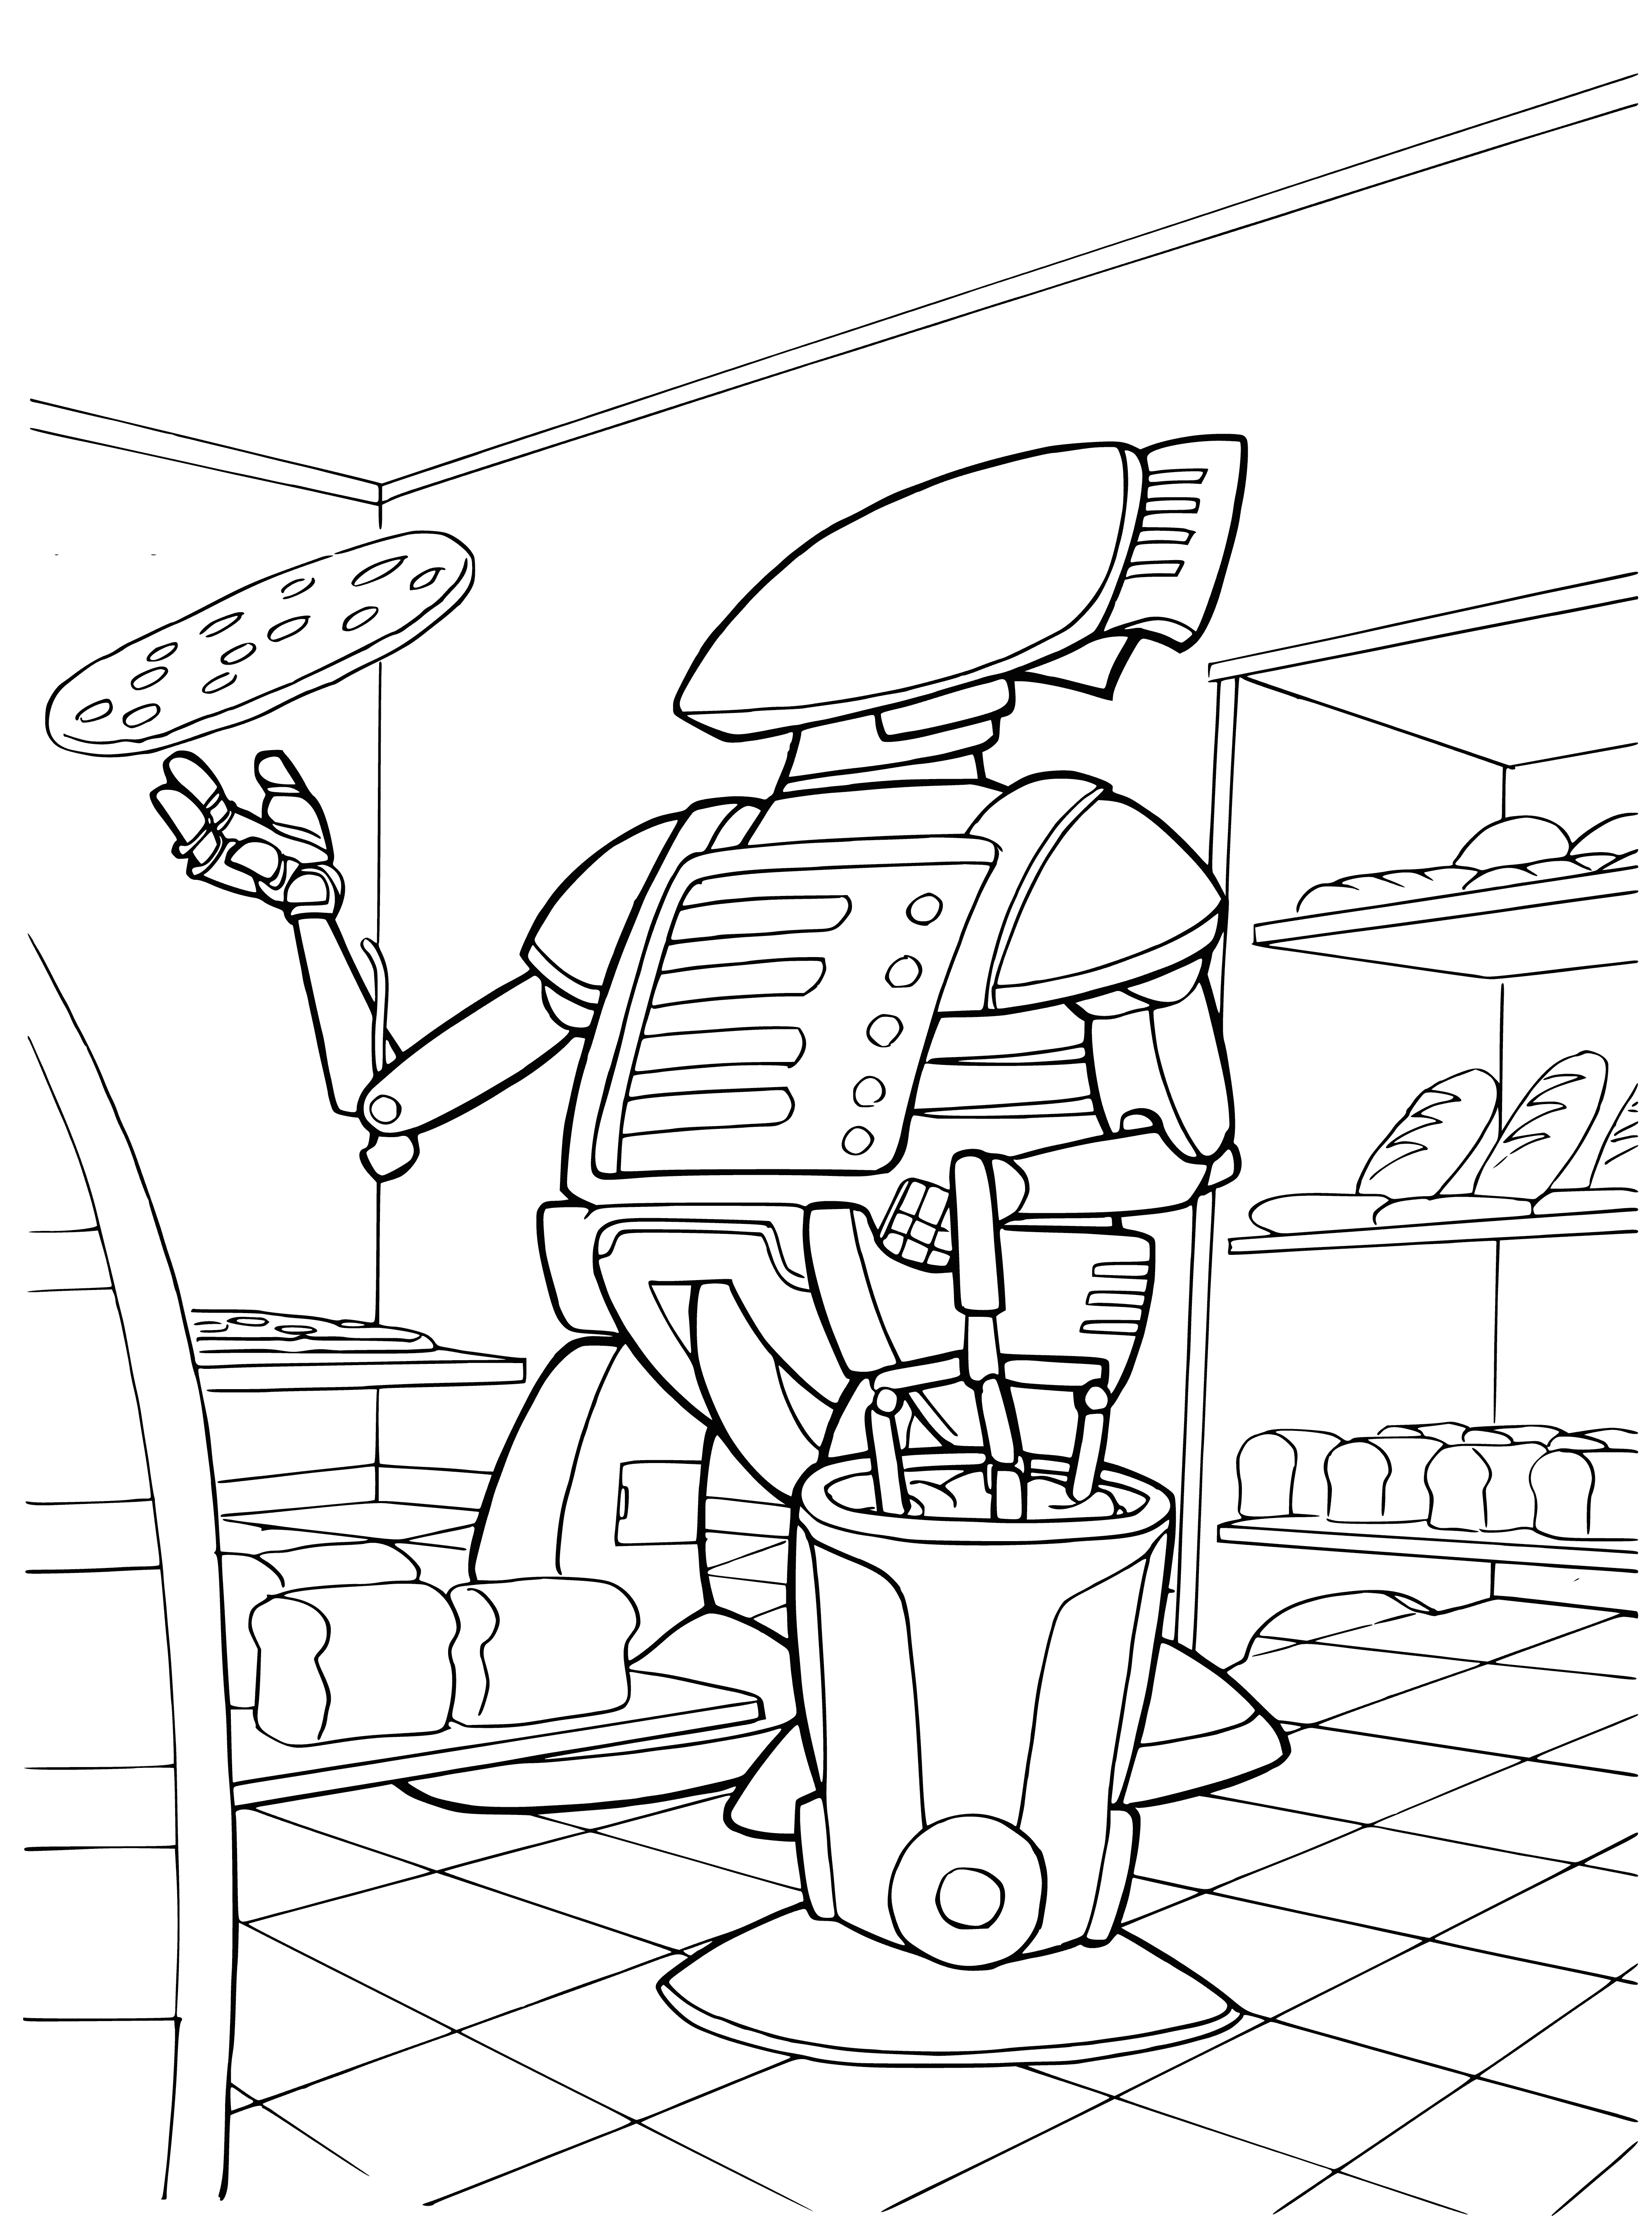 Robot chef coloring page